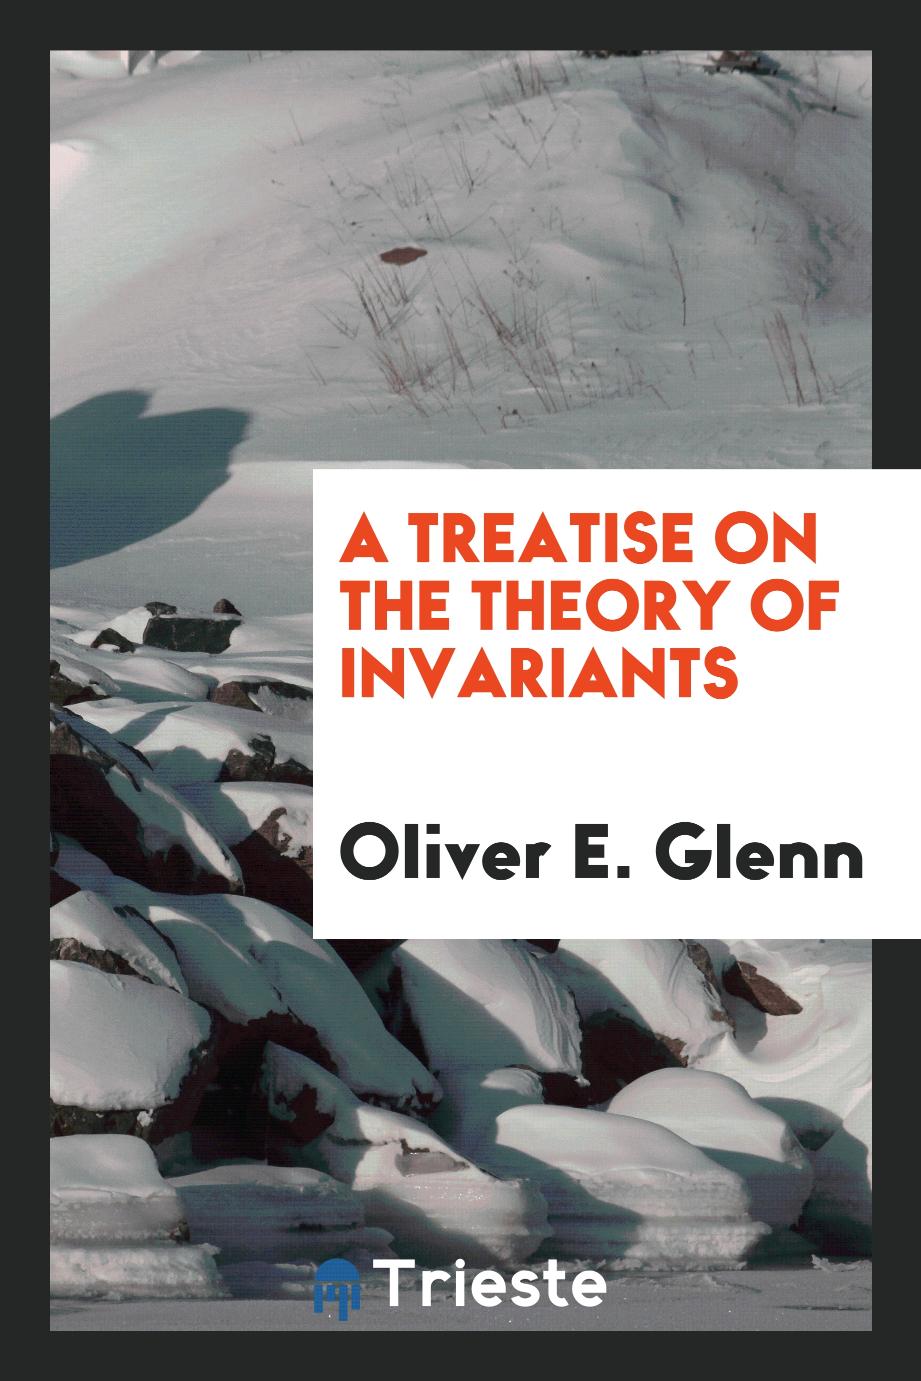 A treatise on the theory of invariants